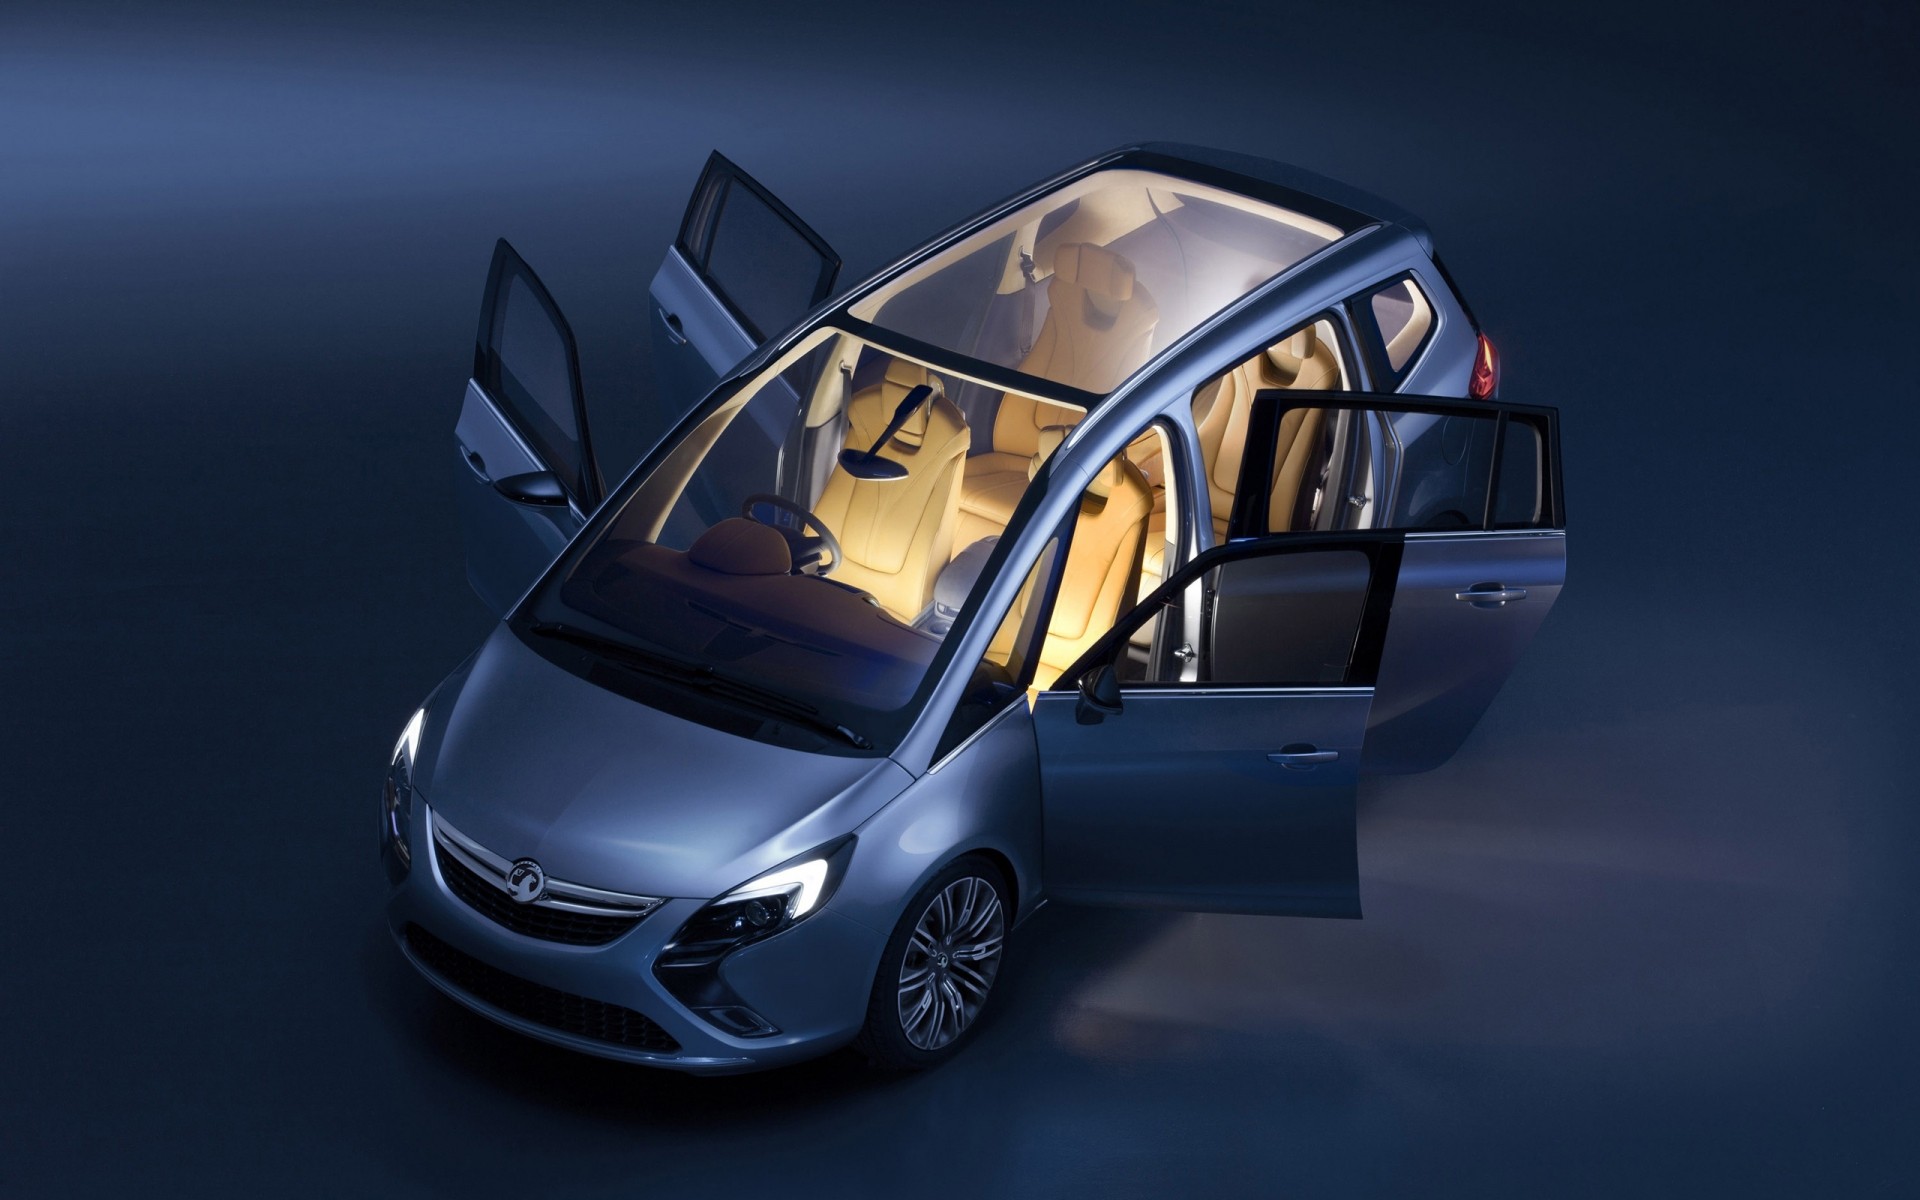 concept cars car vehicle transportation system fast automotive wheel drive opel zafira opel concept